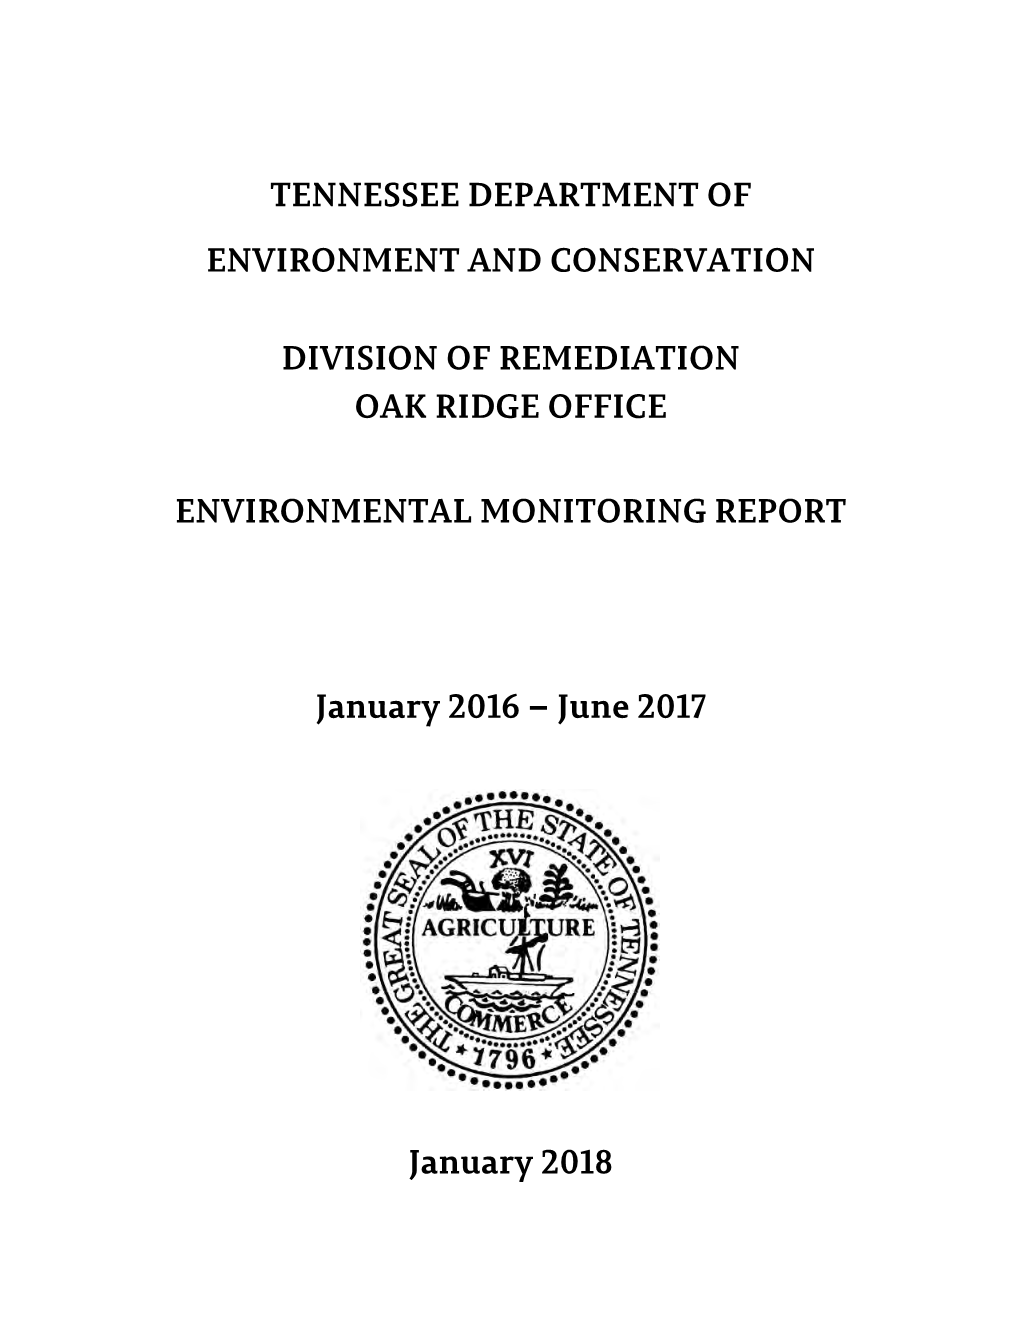 TENNESSEE DEPARTMENT of ENVIRONMENT and CONSERVATION DIVISION of REMEDIATION OAK RIDGE OFFICE ENVIRONMENTAL MONITORING REPORT Ja